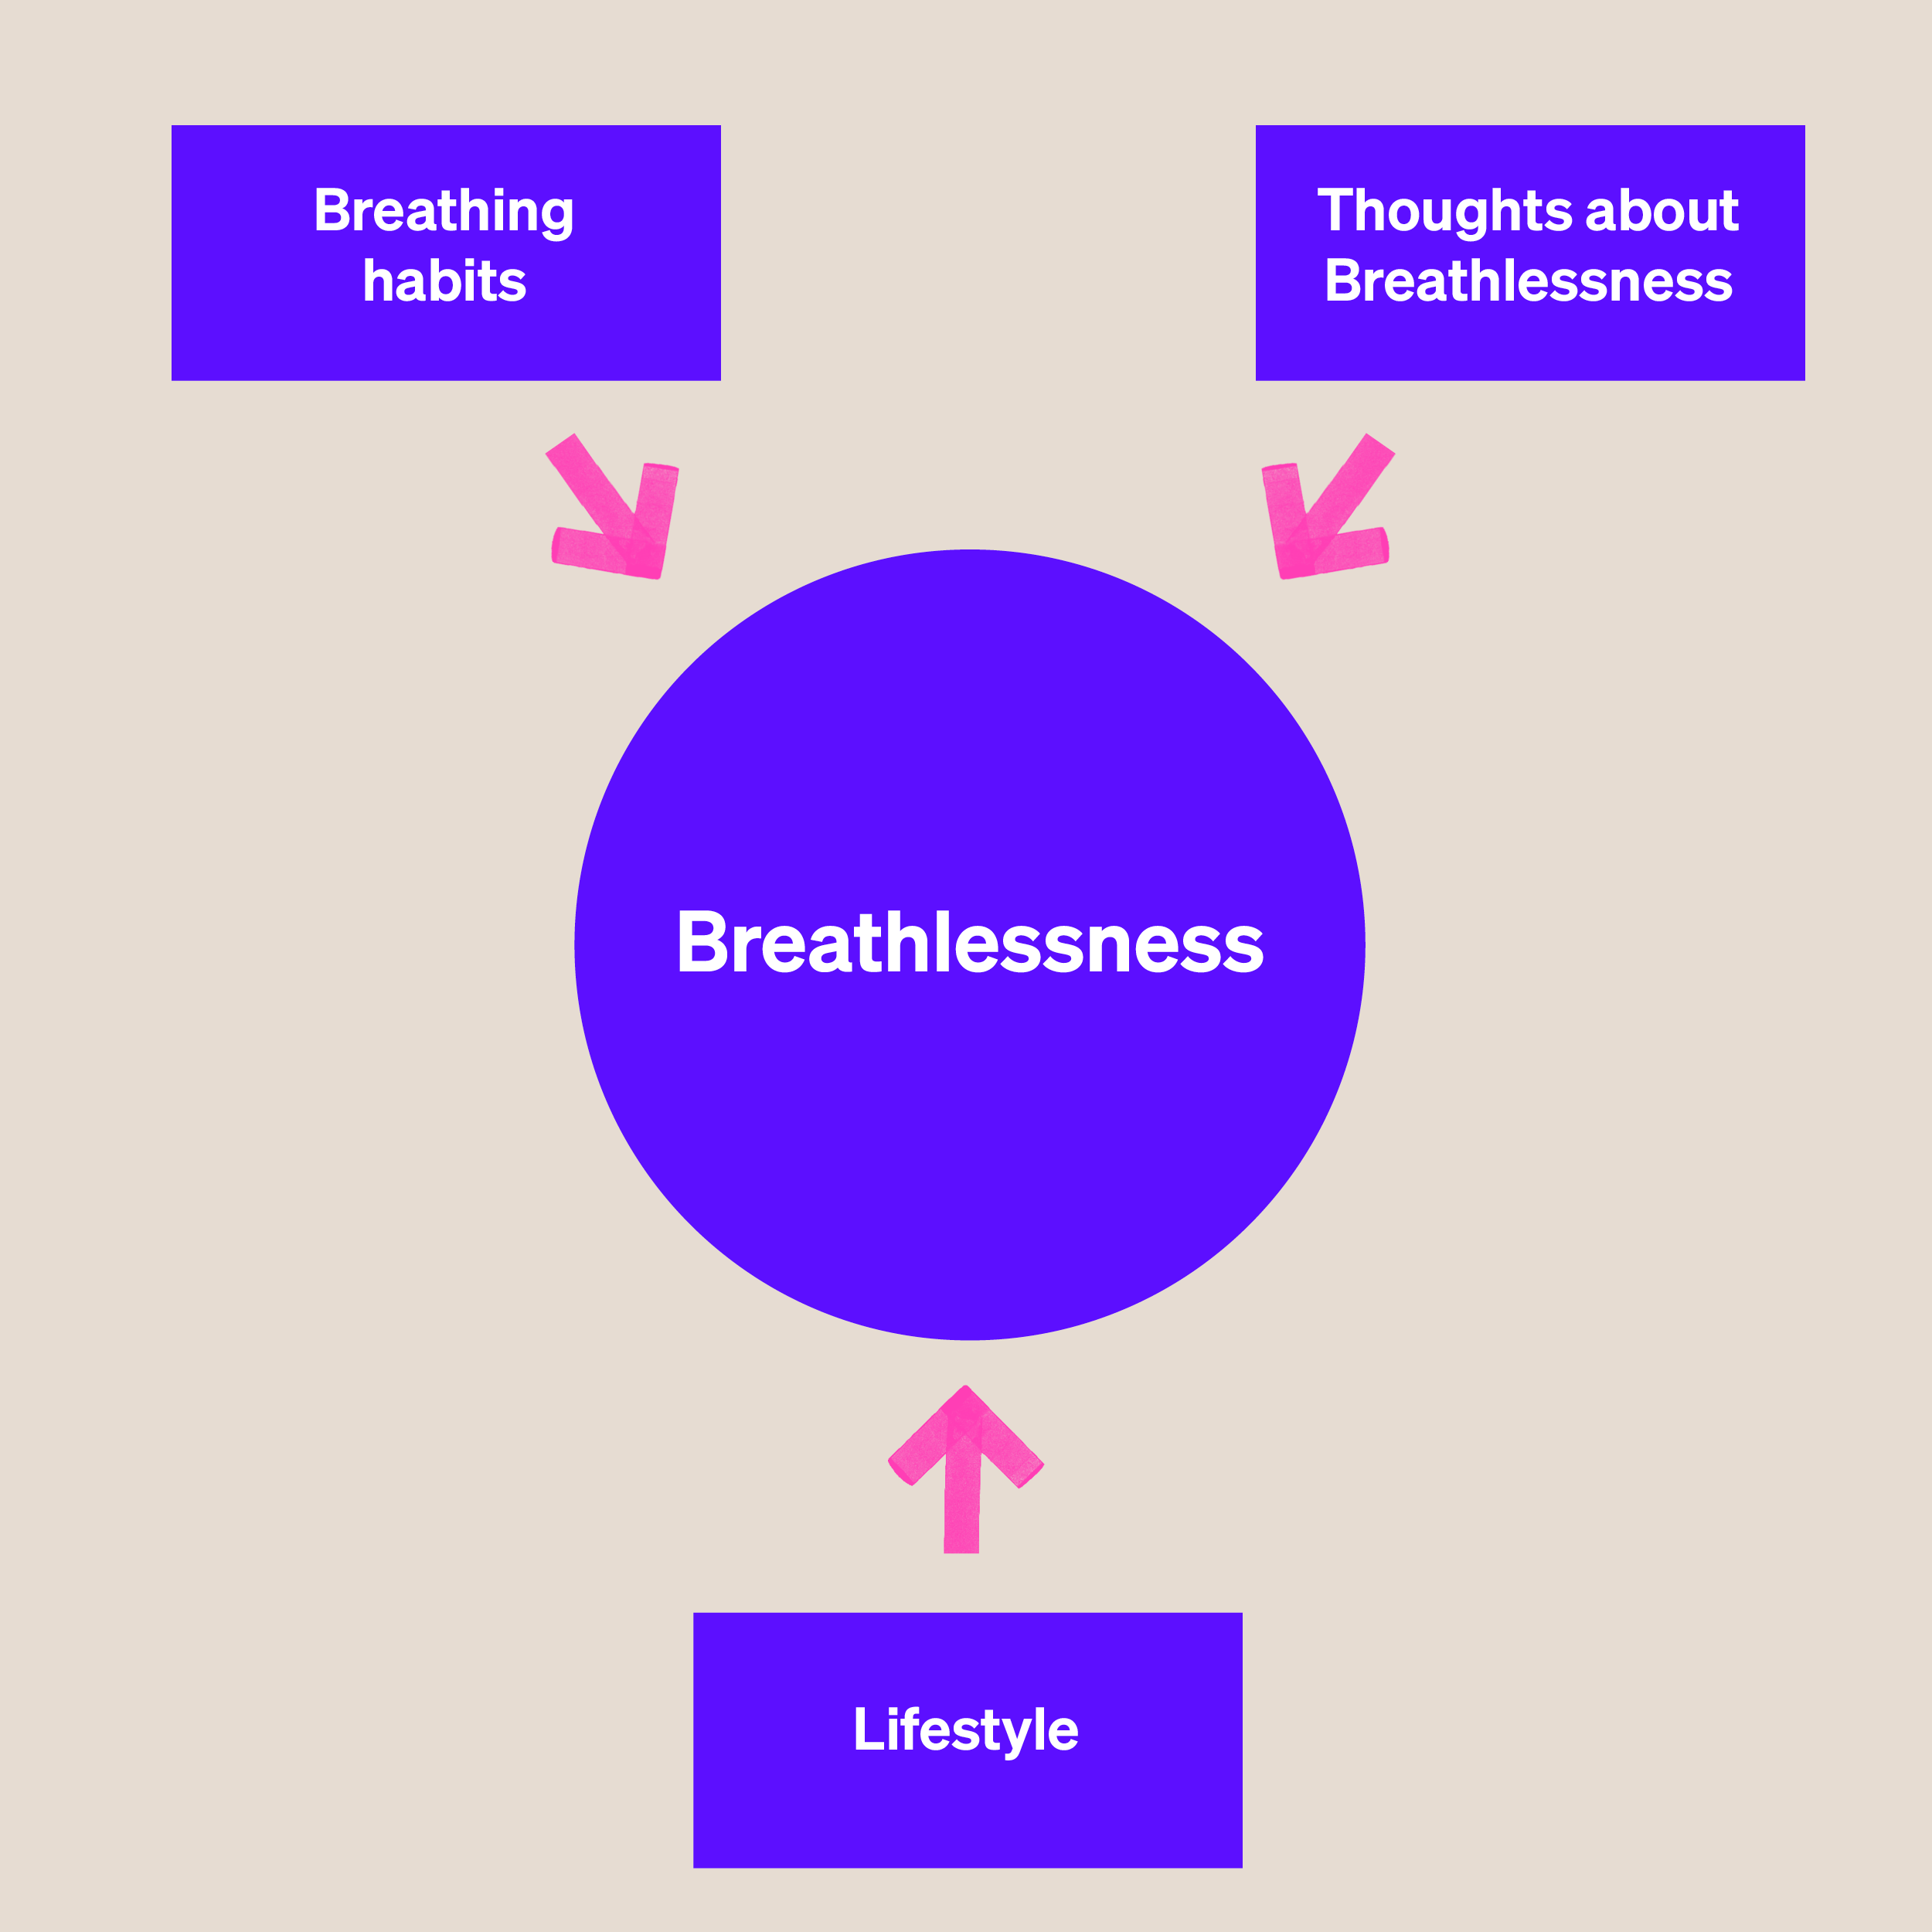 Pursed lip breathing: Benefits and how to do it